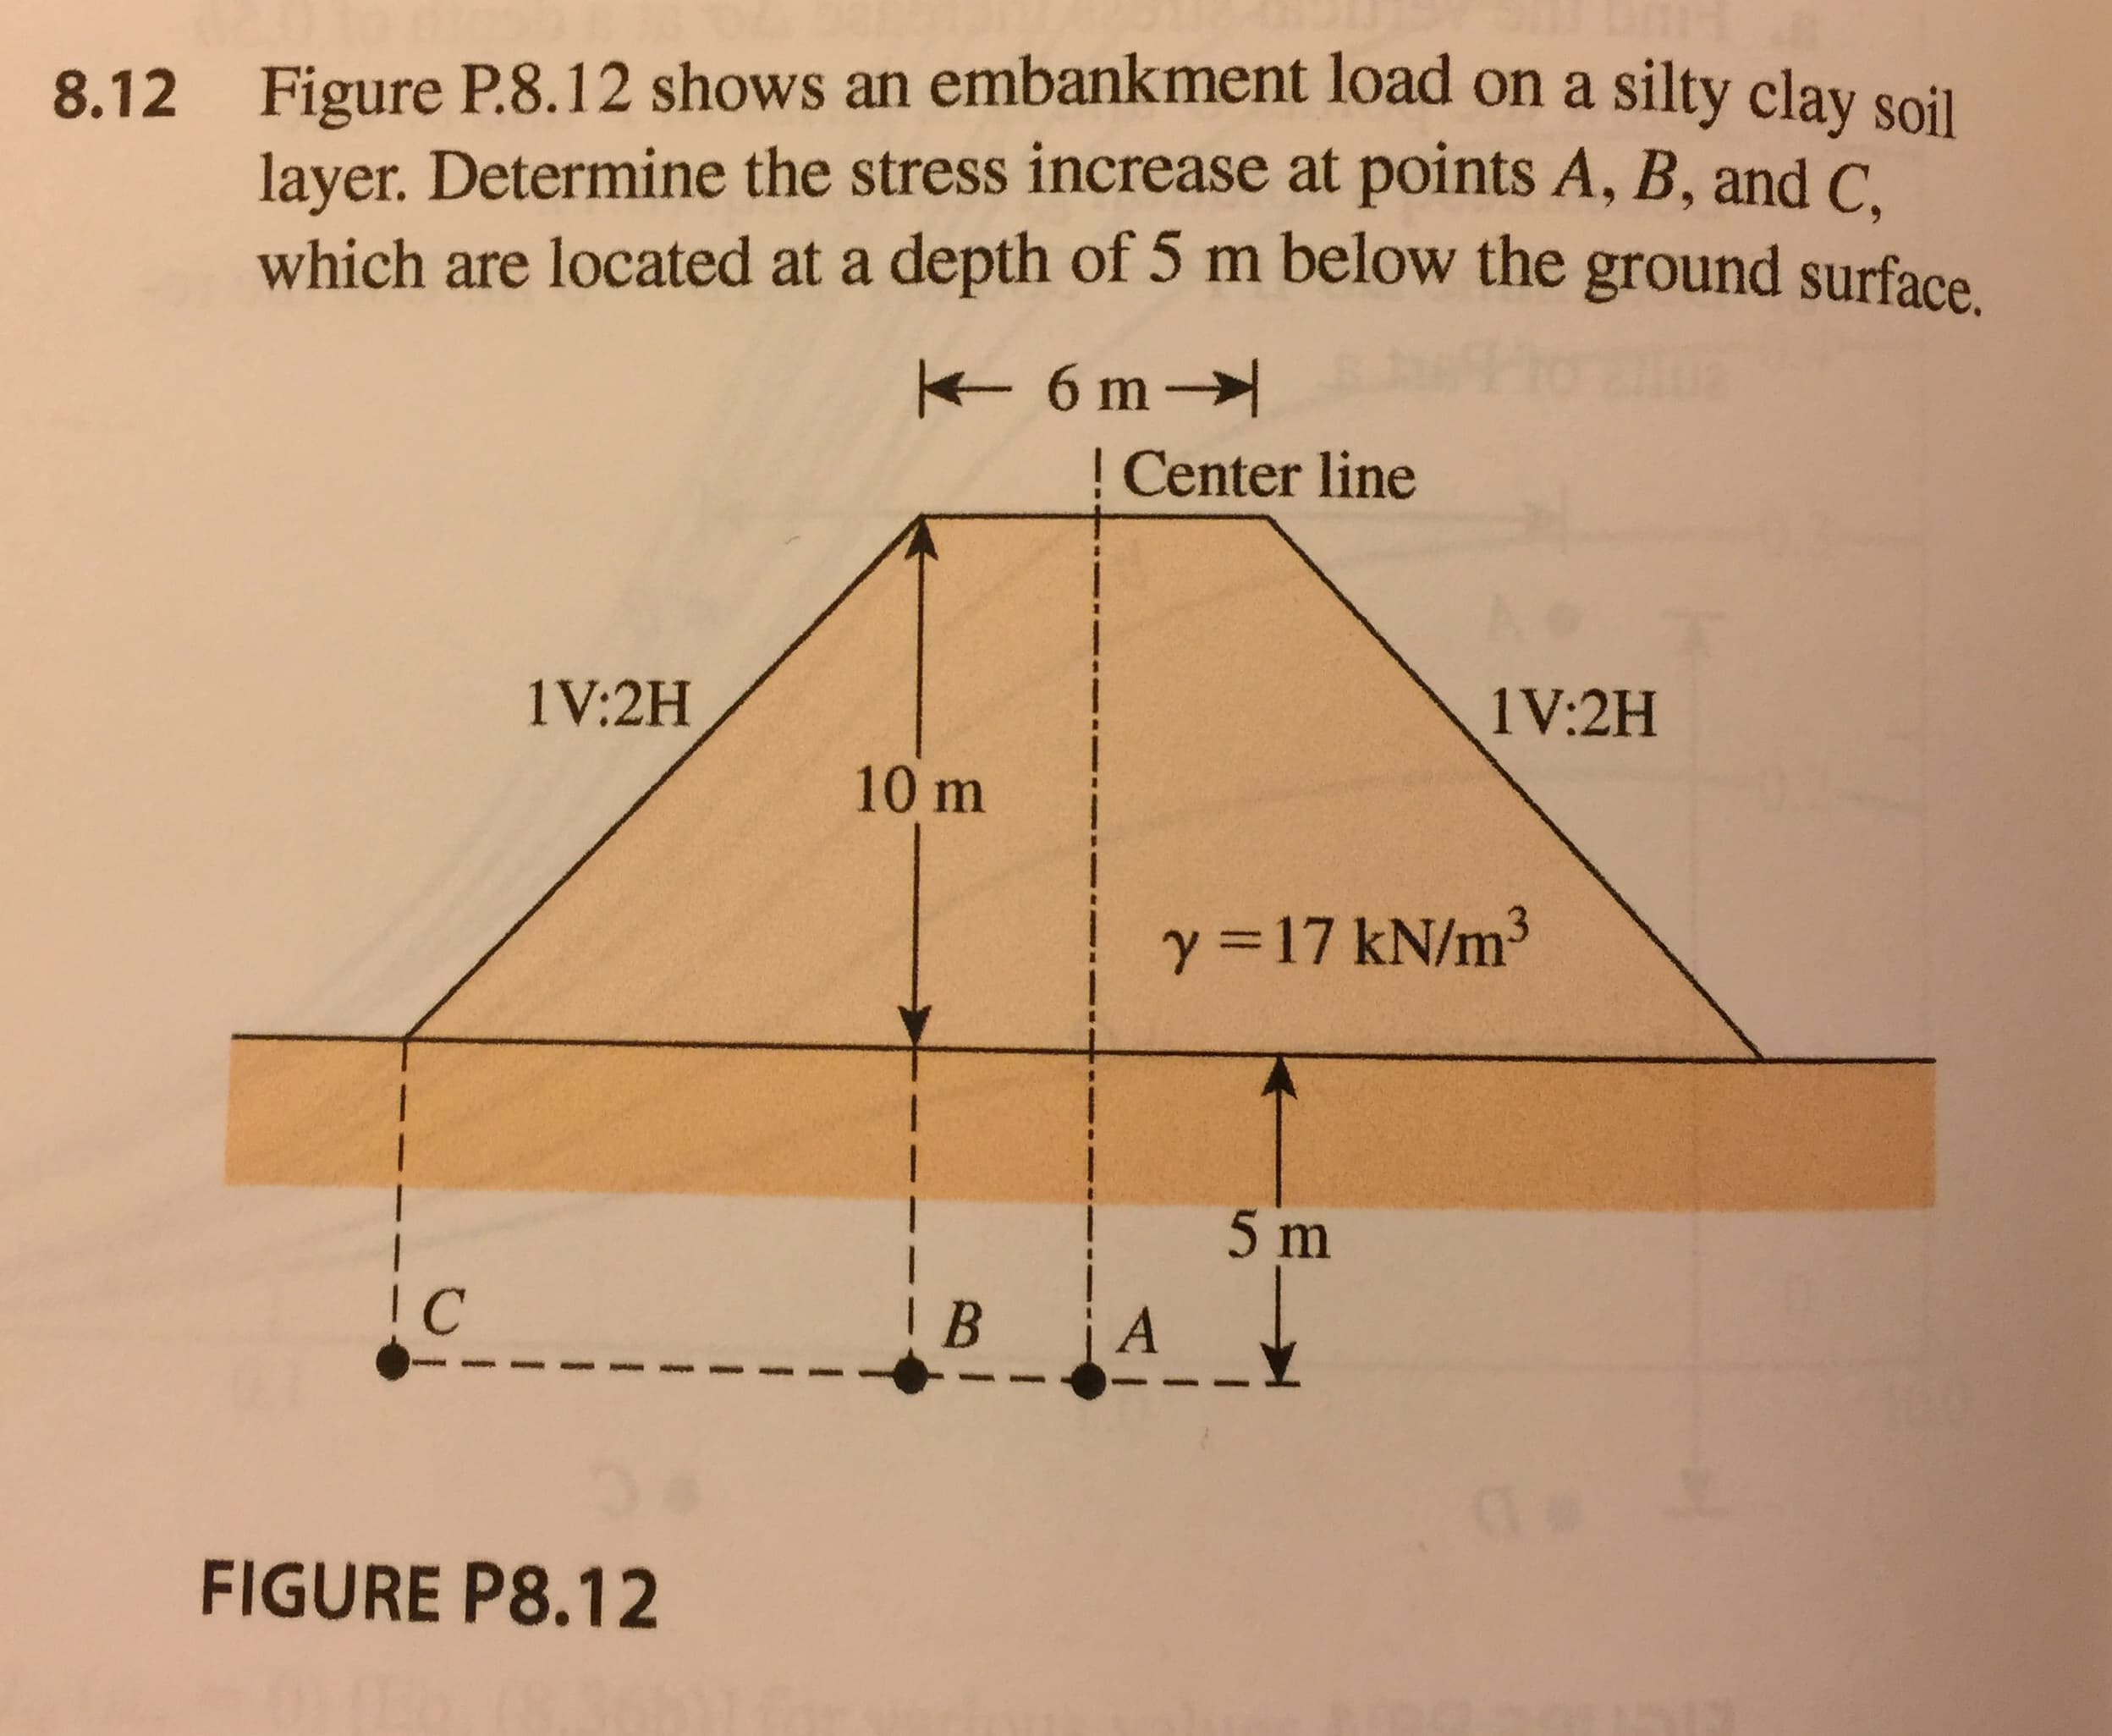 Figure P8.12 shows an embankment load on a silty clay soil
layer. Determine the stress increase at points A, B, and C,
which are located at a depth of5 m below the ground surface.
8.12
Center line
1V:2H
1V:2H
10 m
γ = 17 kN/m3
5 nm
I C
IB İA
FIGURE P8.12
